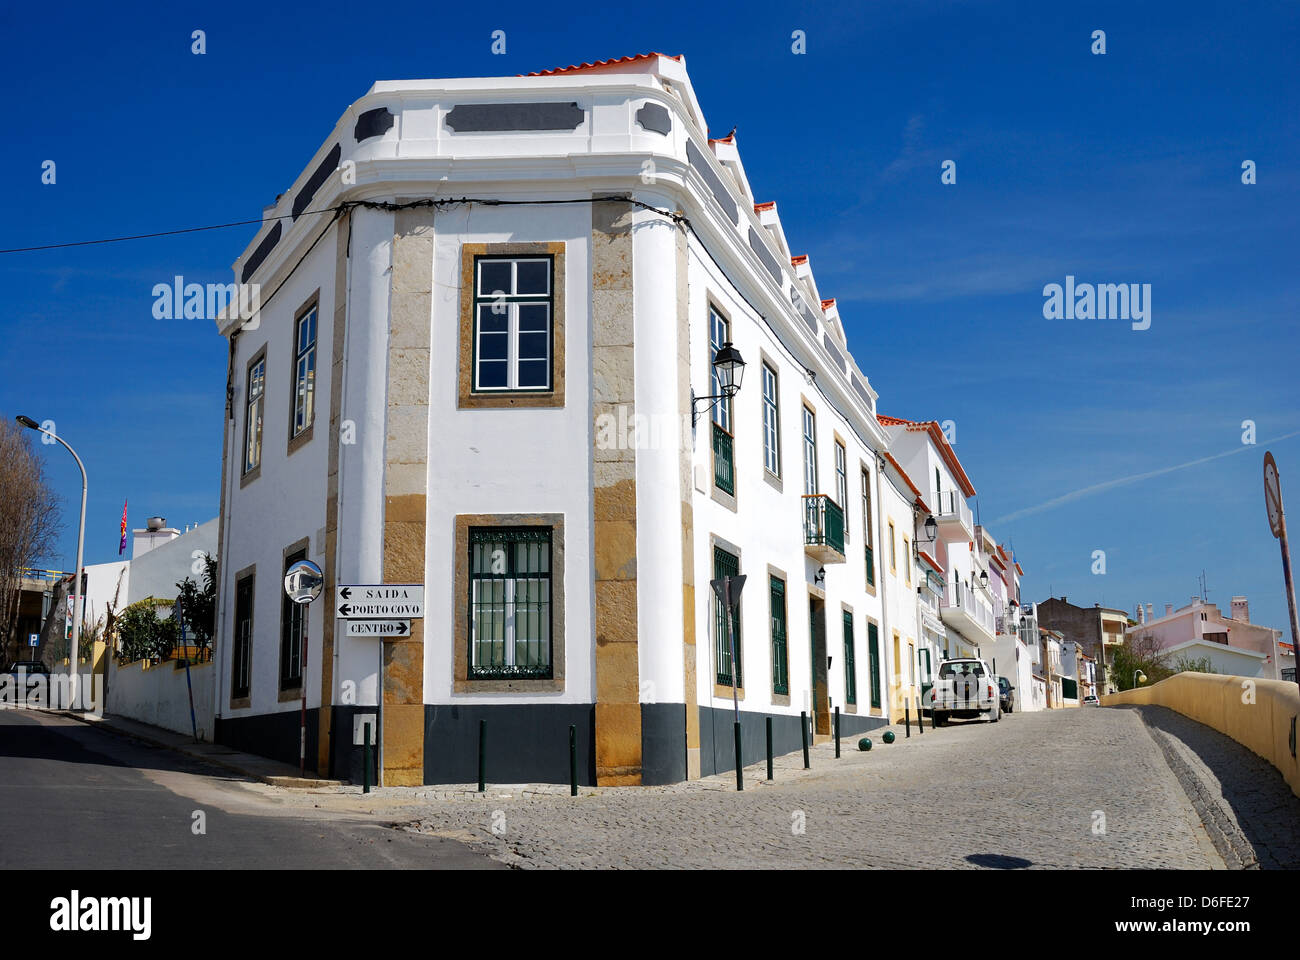 Sines is a municipality in the district of Setubal, Portugal. Stock Photo